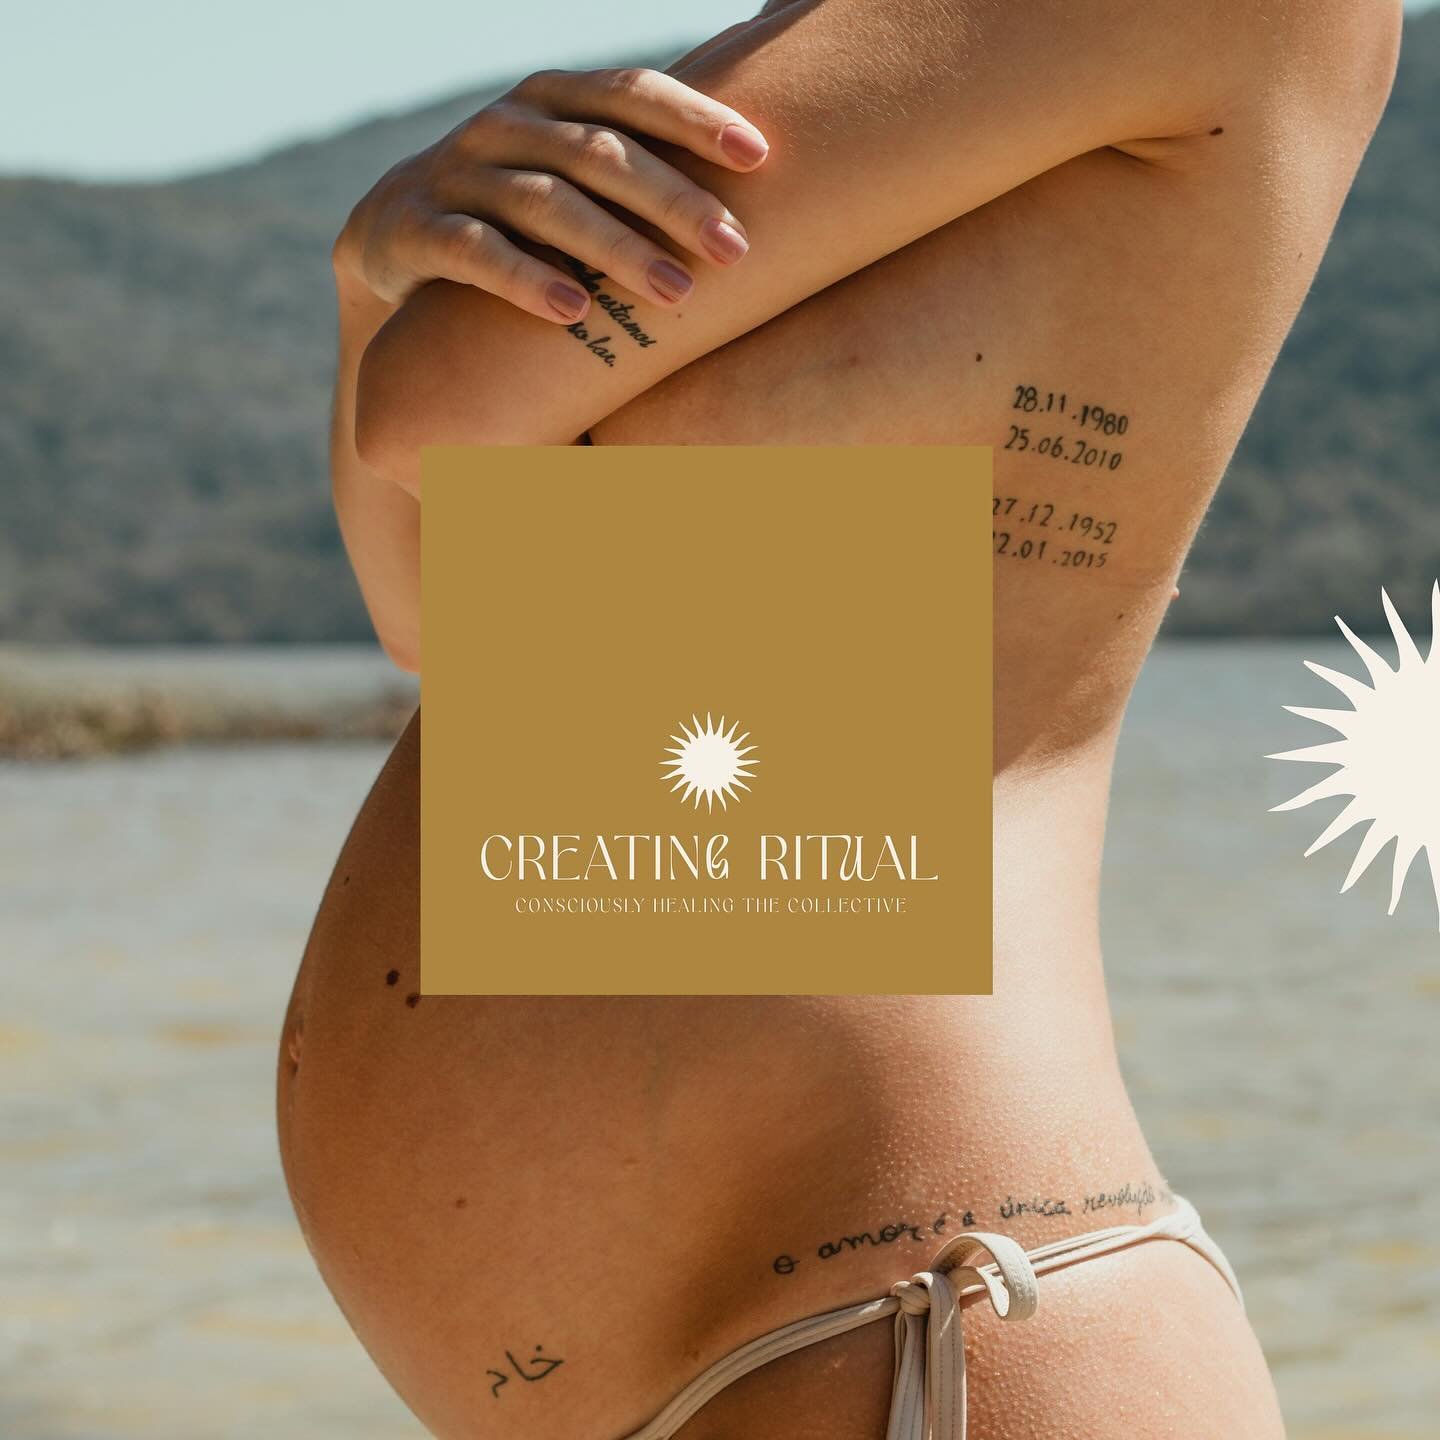 New branding work for Creating Ritual. ☀️

This project was a true labor of love. When my friend Ashlee came to me with the idea of a rebirth for herself &amp; her work I immediately knew that this was a project I would fall in love with. 

This proj